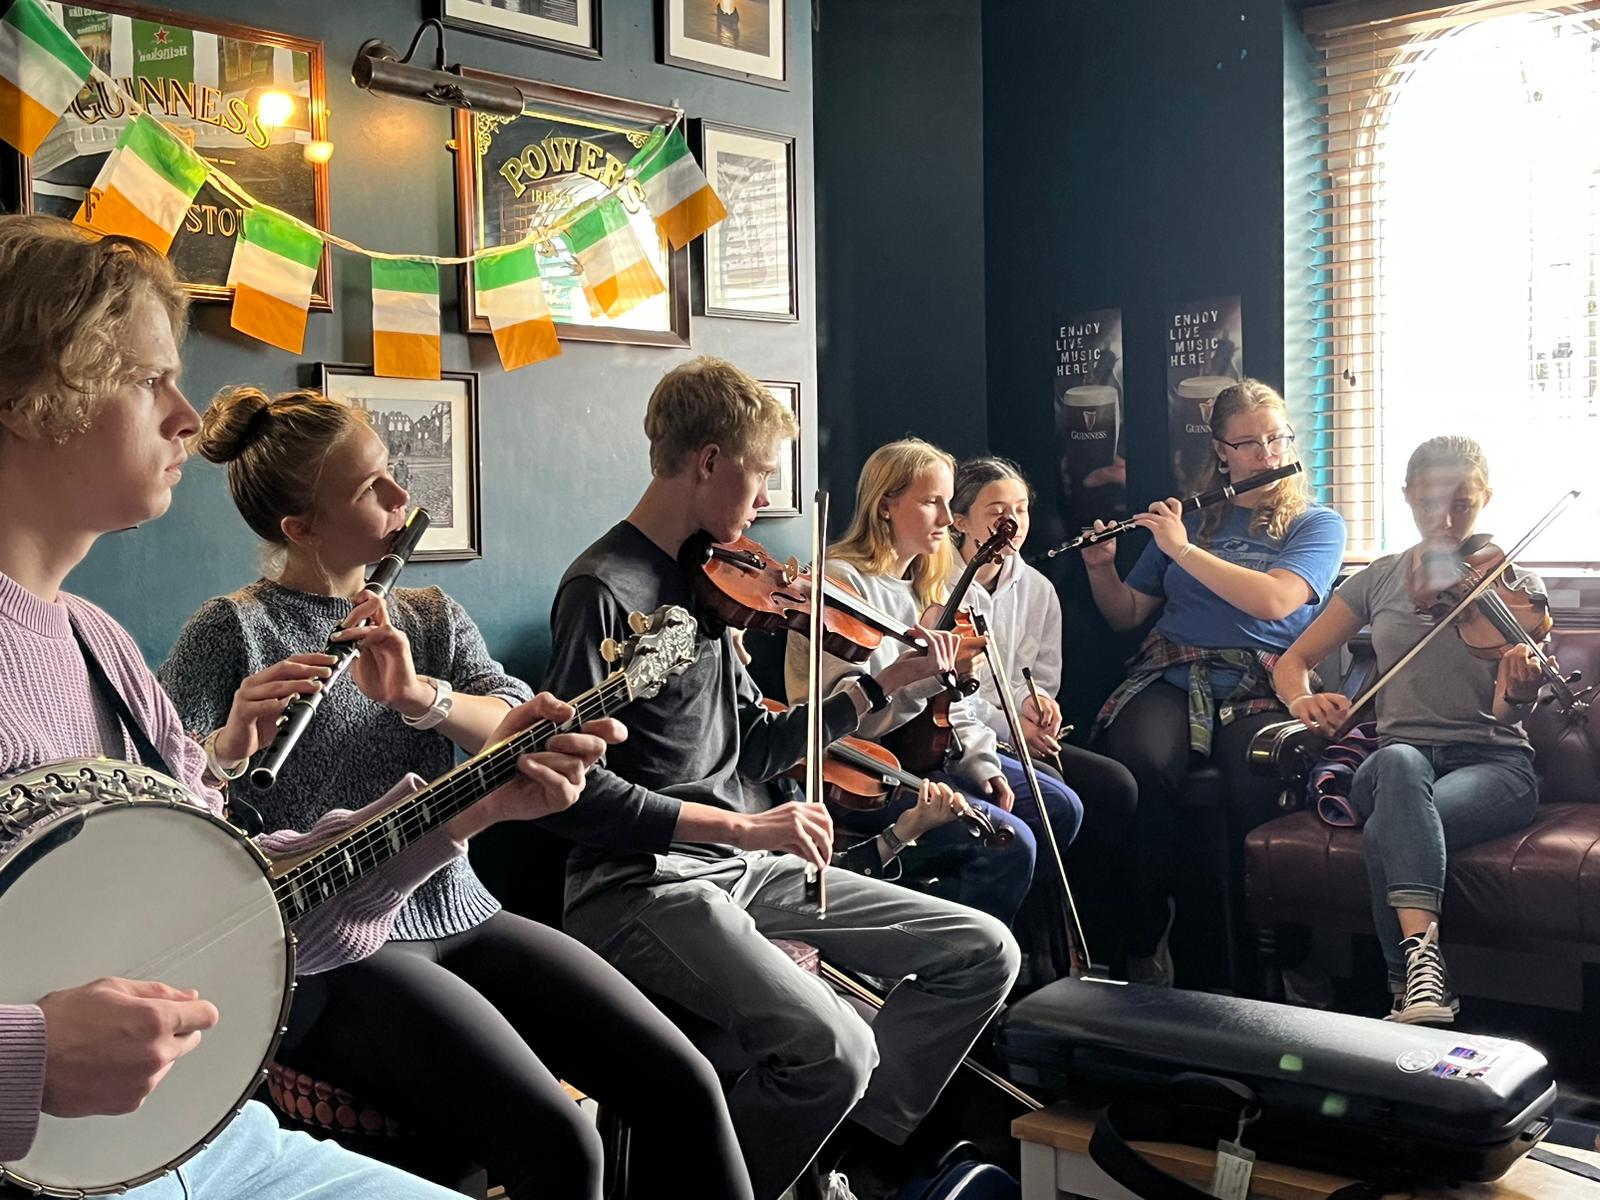 The magic of the “fleadh experience” was at the sessions, rehearsals, late-night card games, Scoil Éigse workshops, concerts, riverside walks, and copious cups of Irish tea (and coffee). This was the inaugural session of Minnesota folks at Kerrigans.